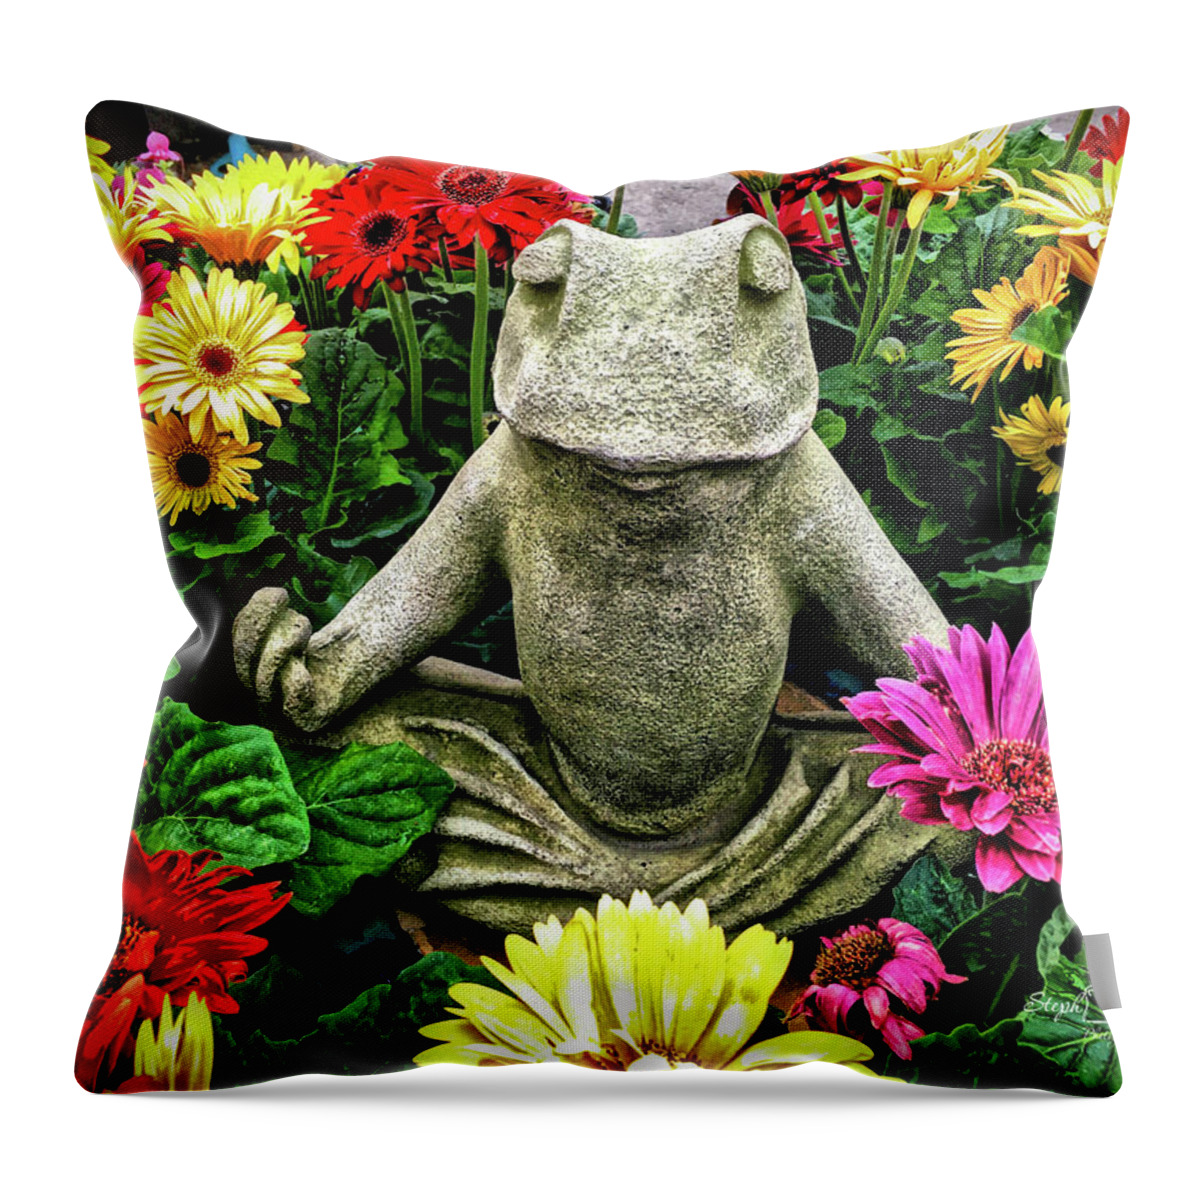 Namaste Throw Pillow featuring the photograph Namaste by Steph Gabler